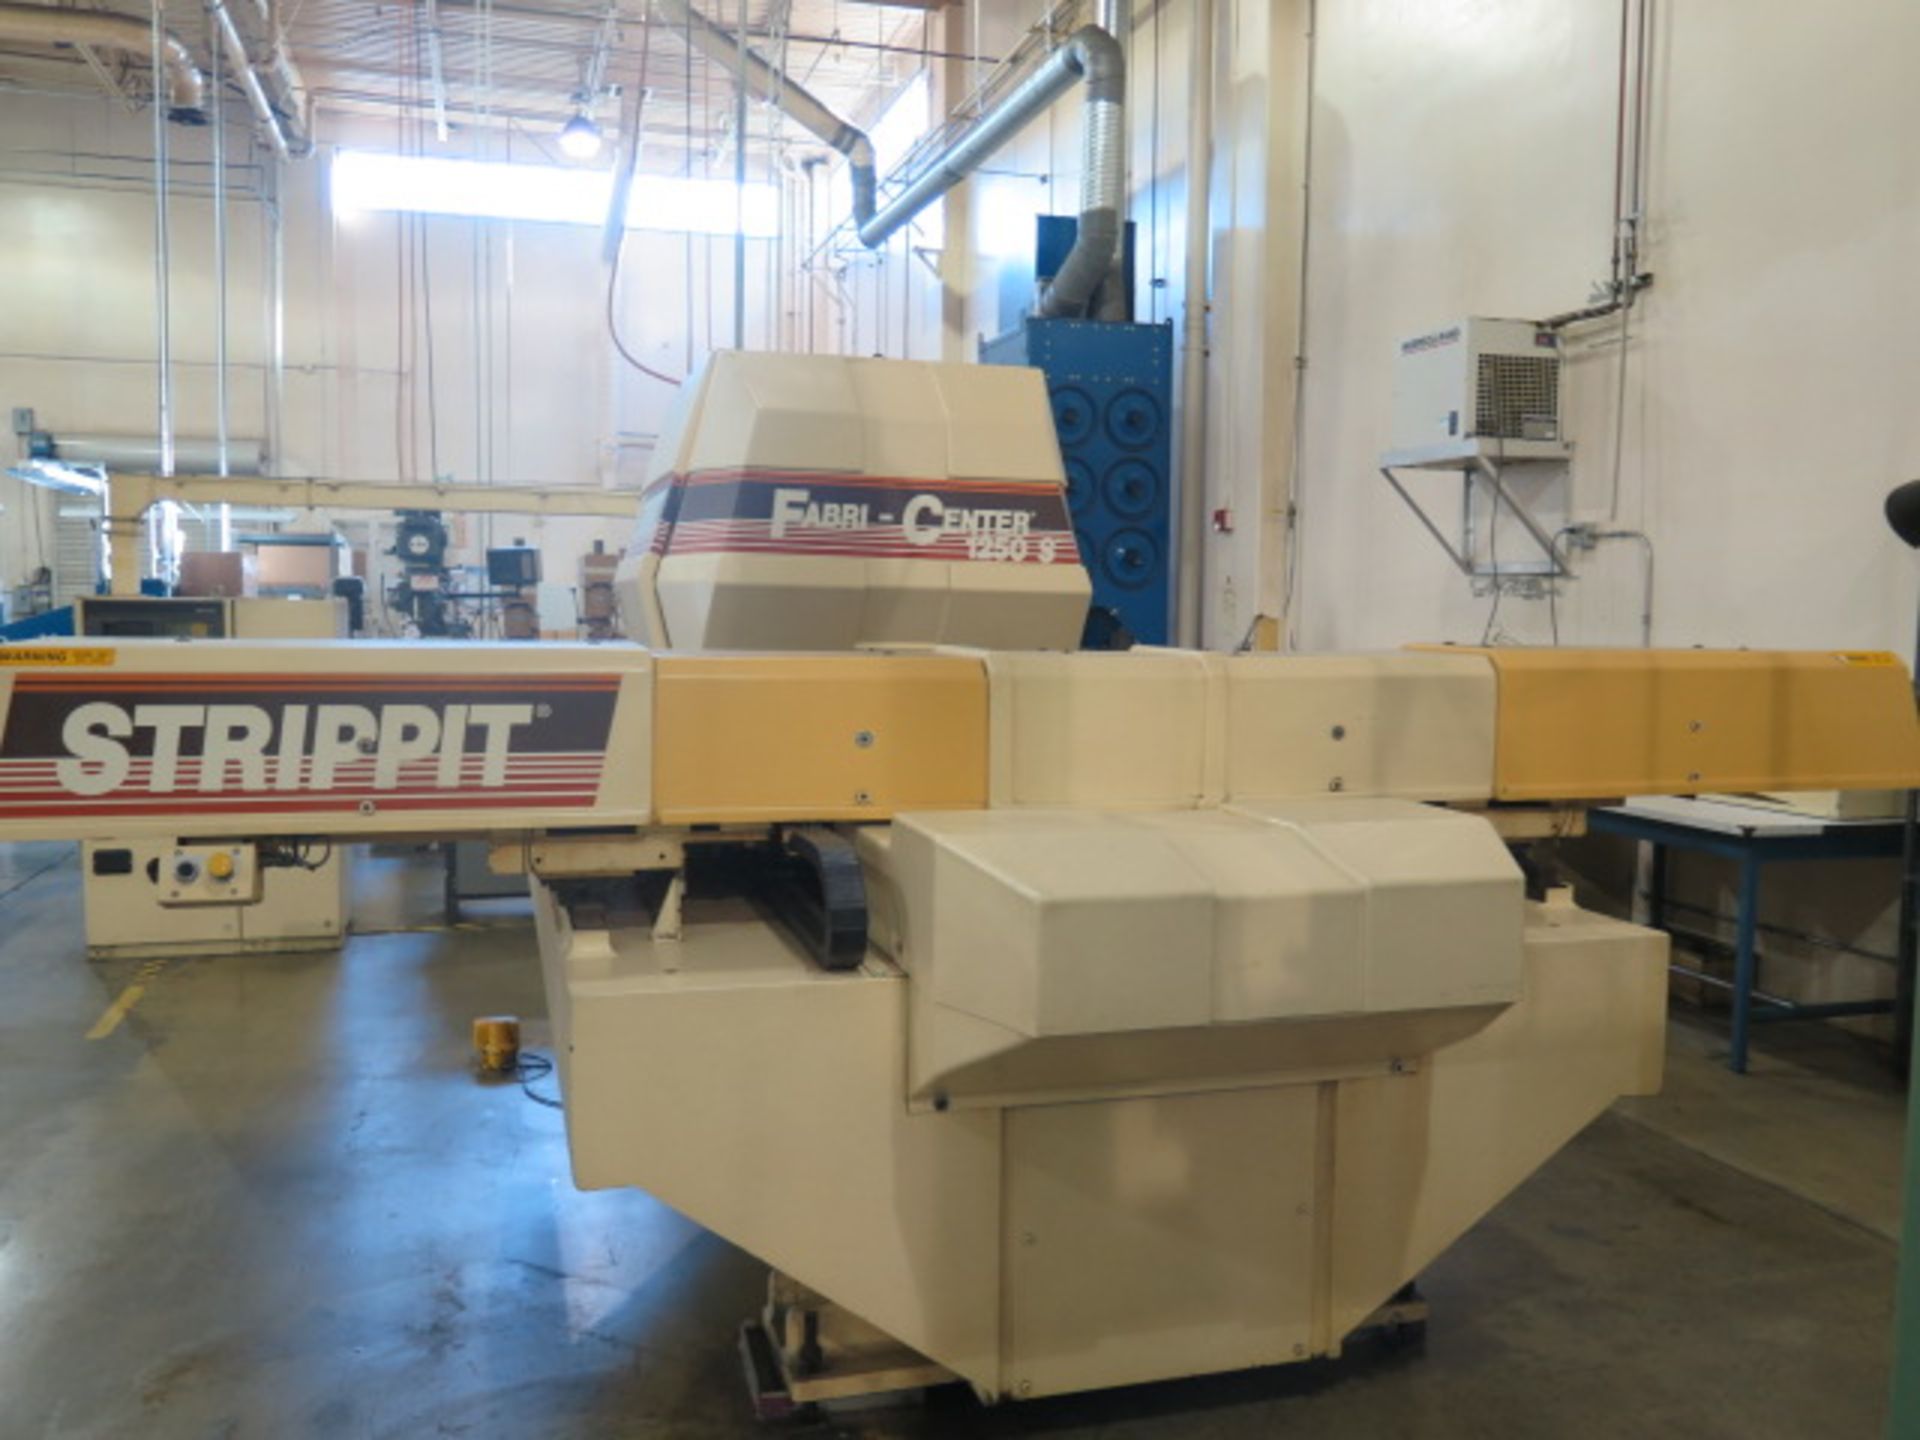 Strippit 1250S “Fabri-Center” 33 Ton CNC Turret Punch Press s/n 1031042490 w/ Fanuc 0P, SOLD AS IS - Image 4 of 14